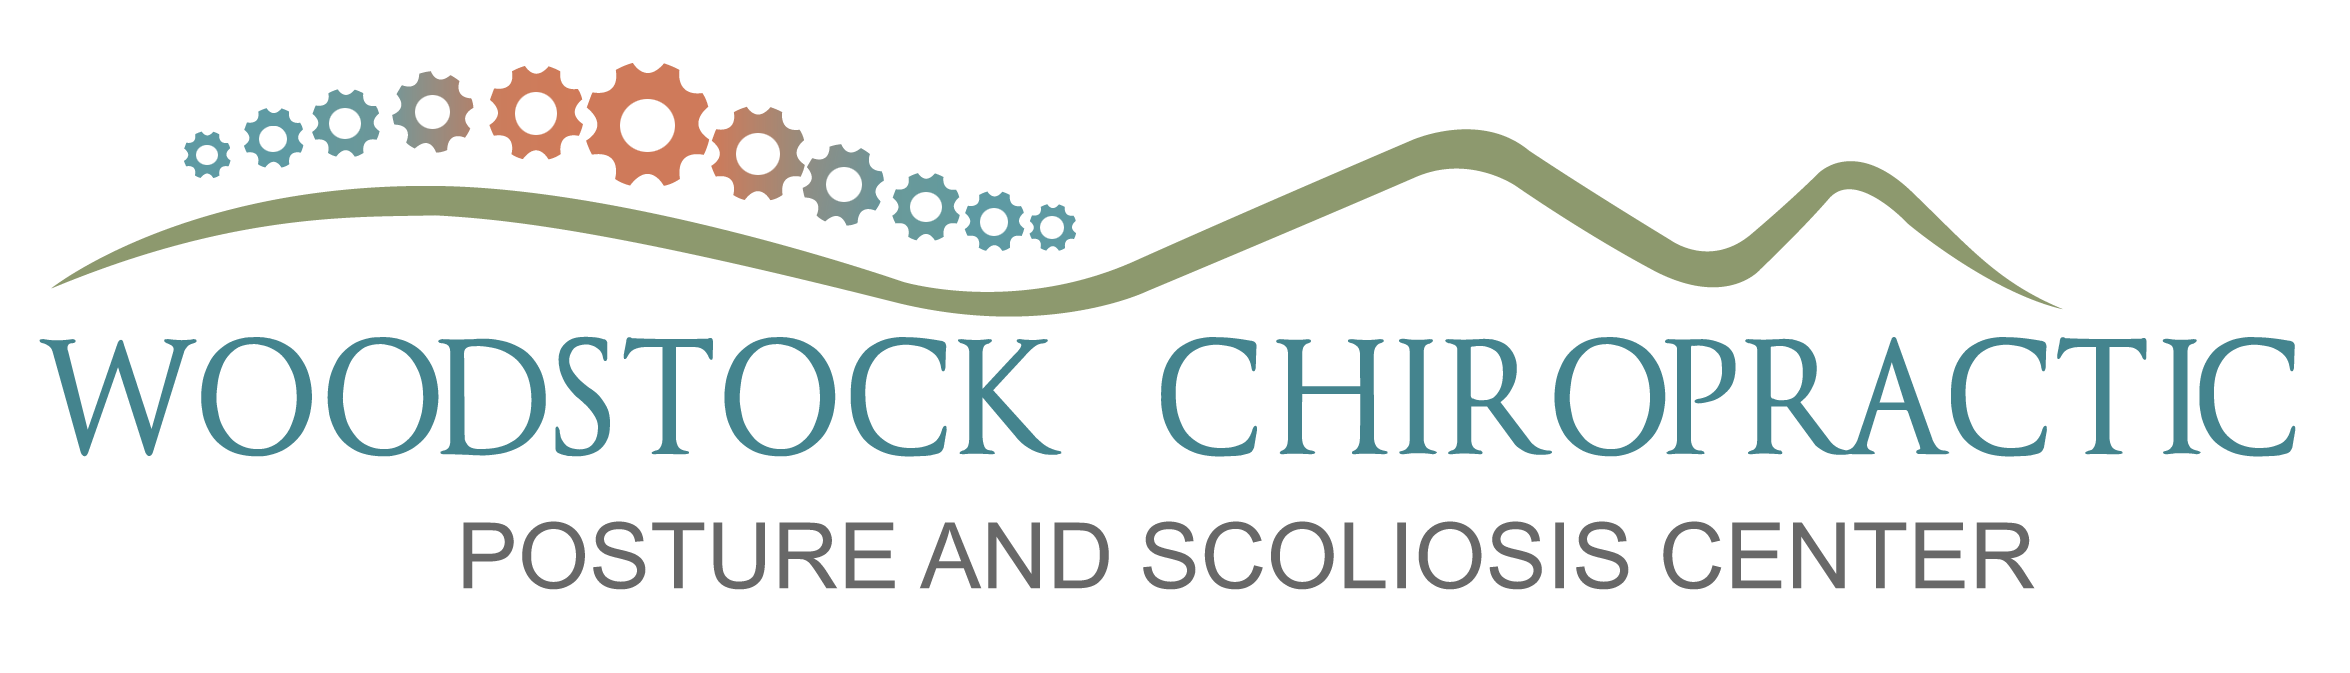 Woodstock Chiropractic, Posture and Family Care